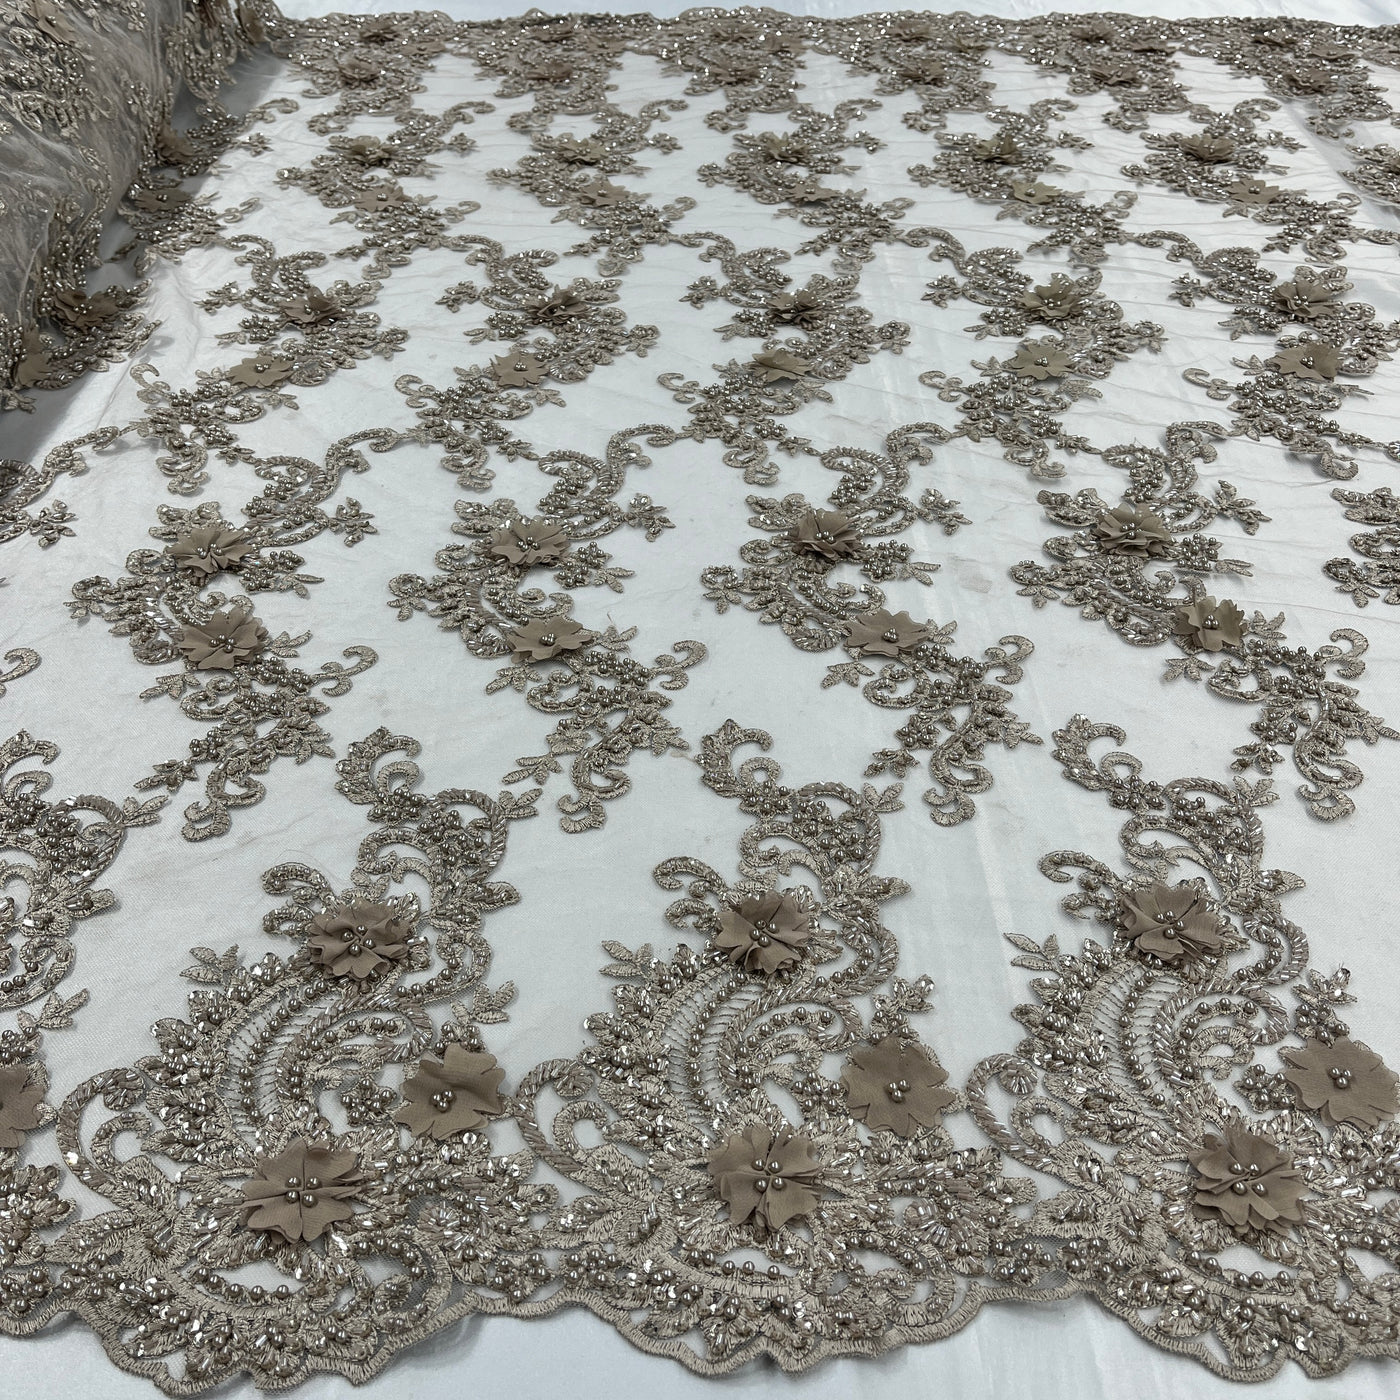 3D Floral Lace Fabric Embroidered on 100% Polyester Net Mesh | Lace USA - GD-2303